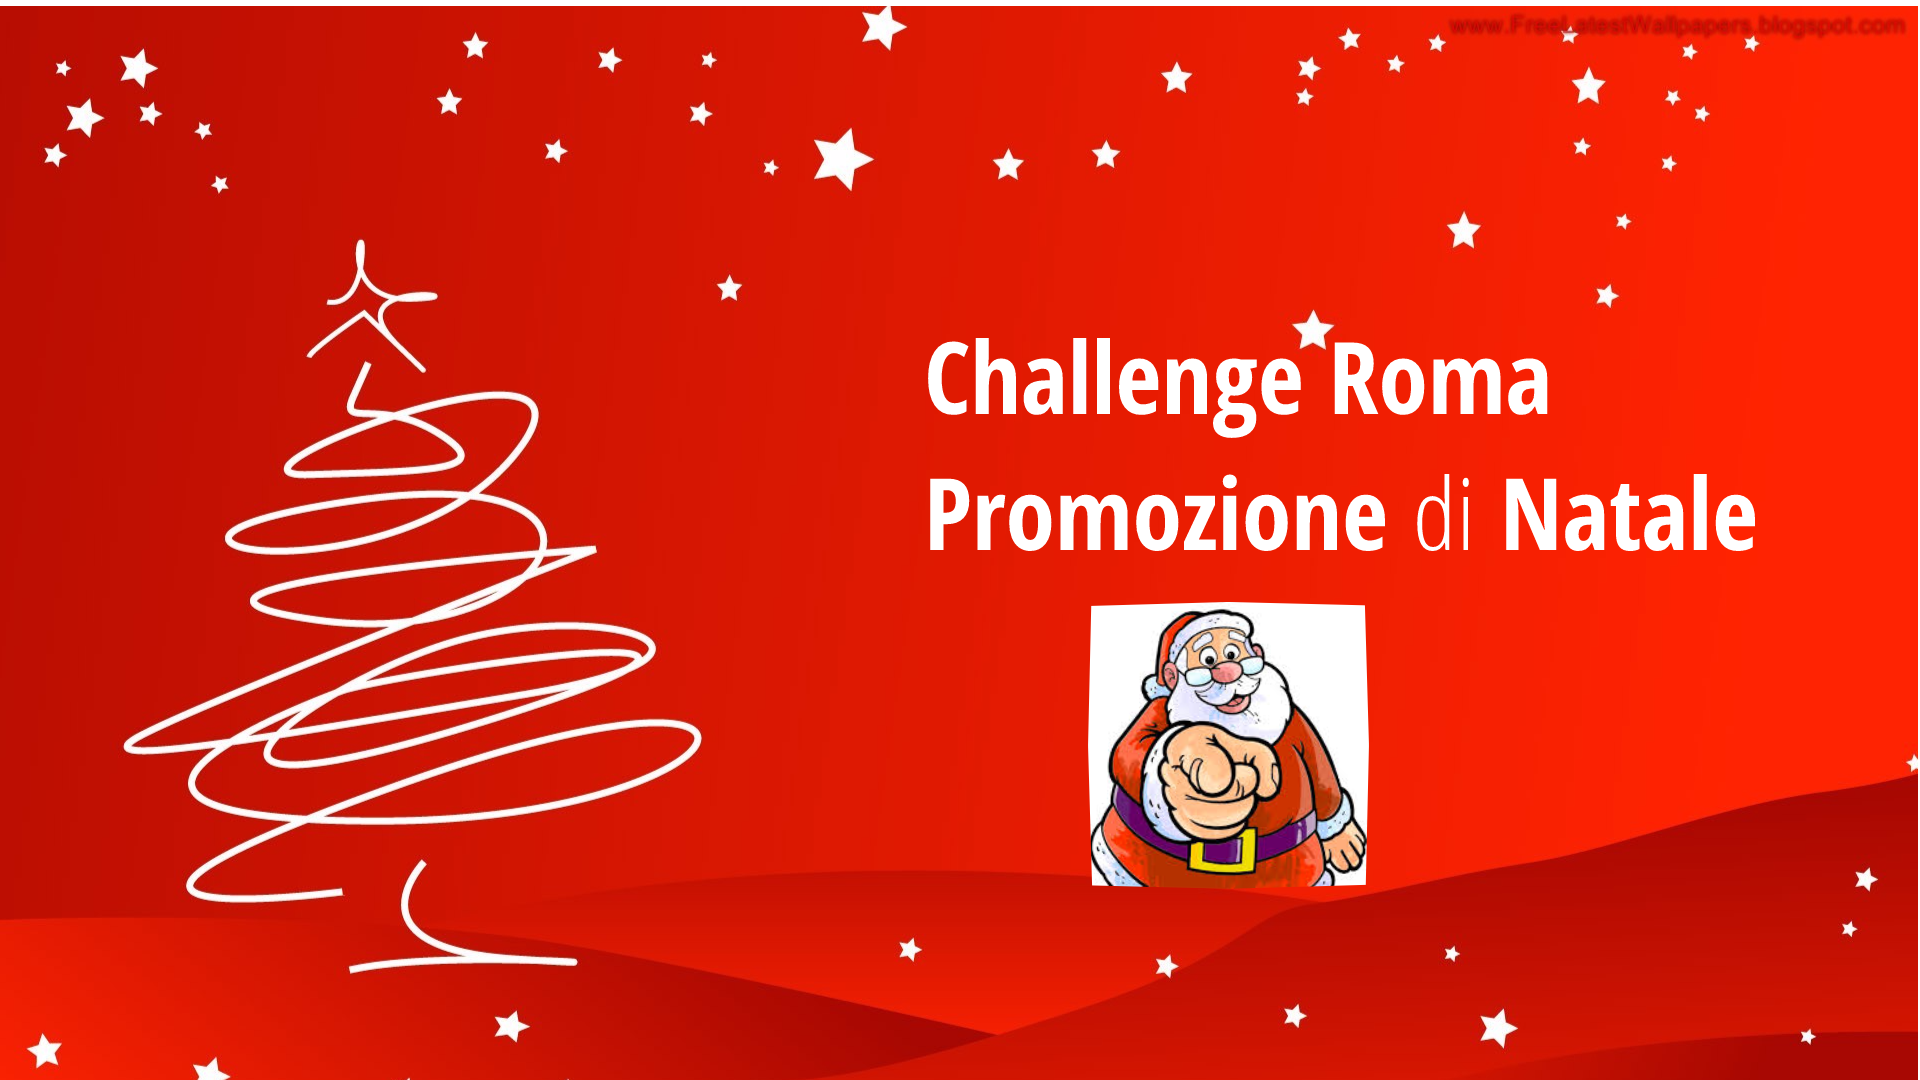 images/2017/Gare/challenge_roma/challenge_auguri.png